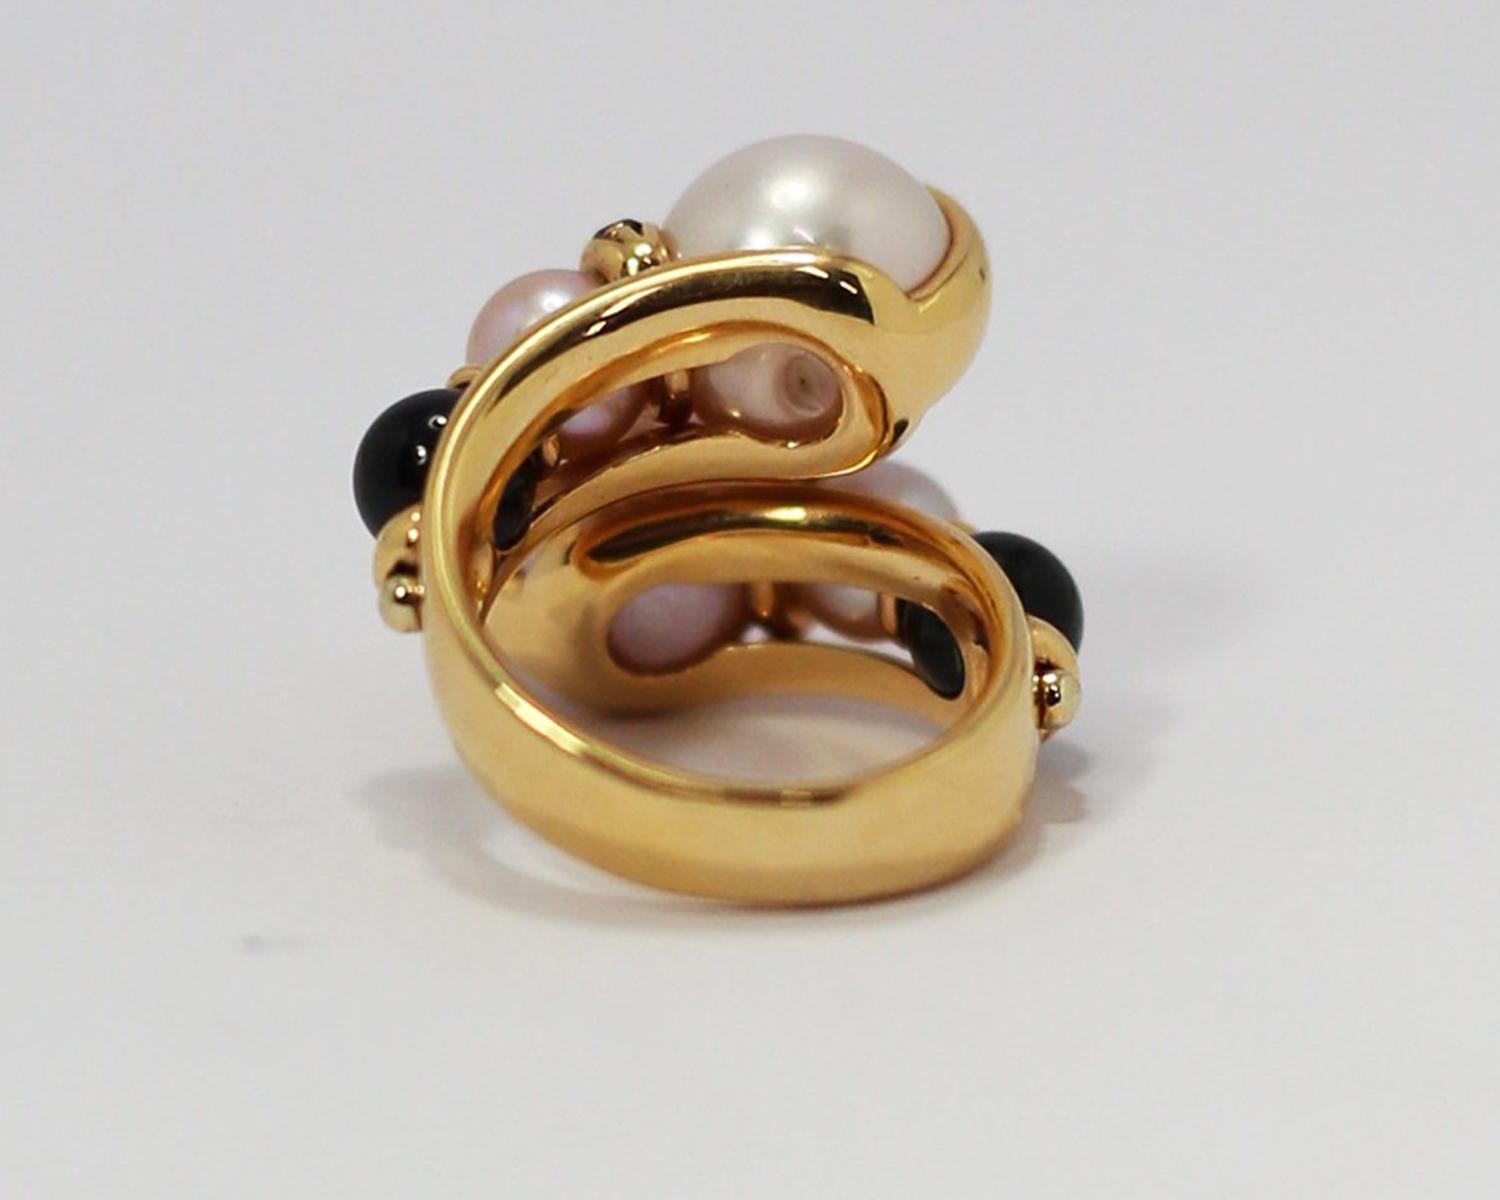 Contemporary Mangiarotti Pearl and Onyx Twist 18k Gold Ring with White and Black Diamonds